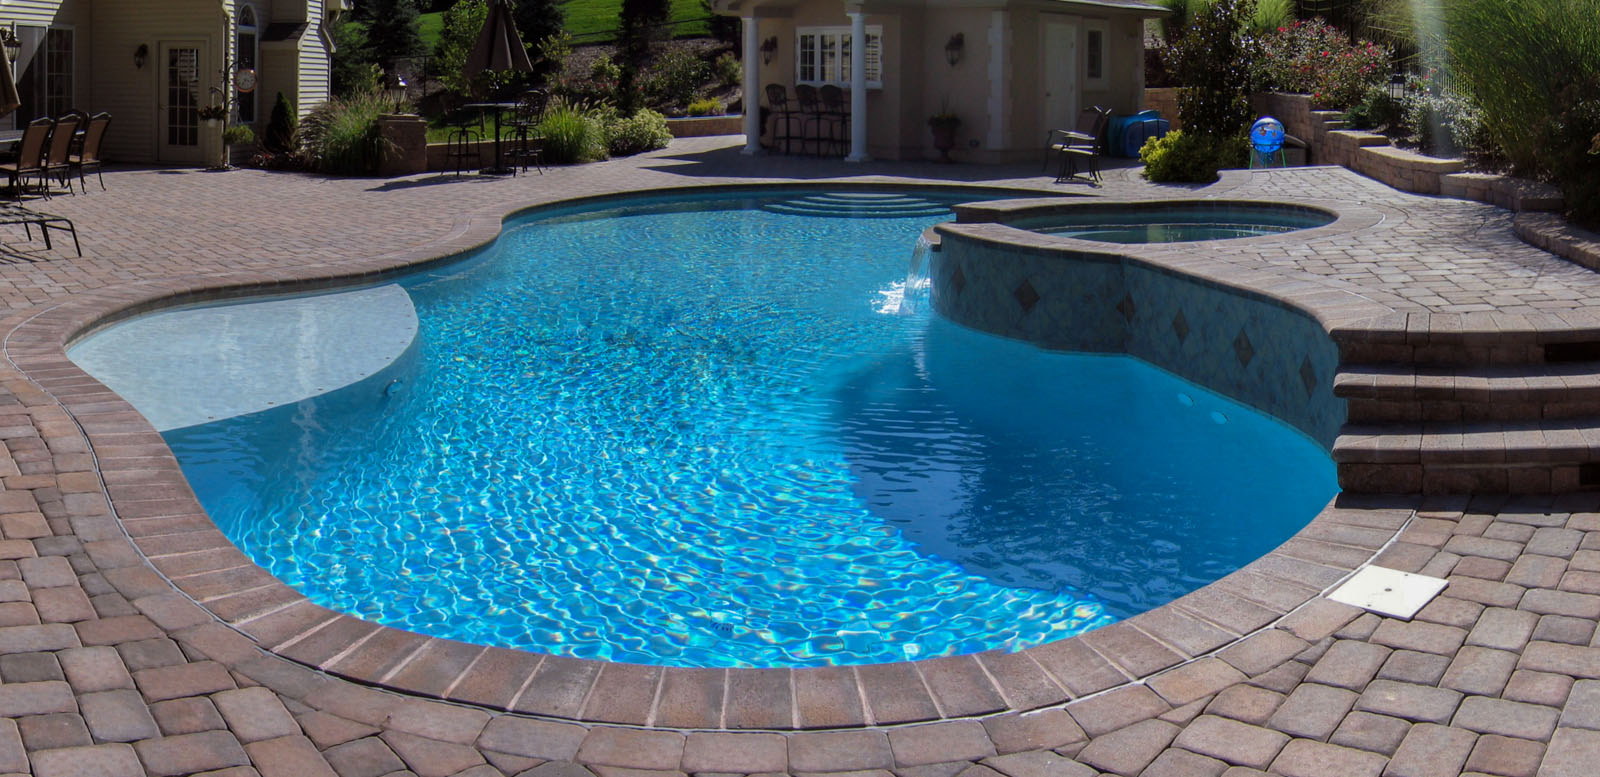 nj swimming pool design with upper level spa and pool house